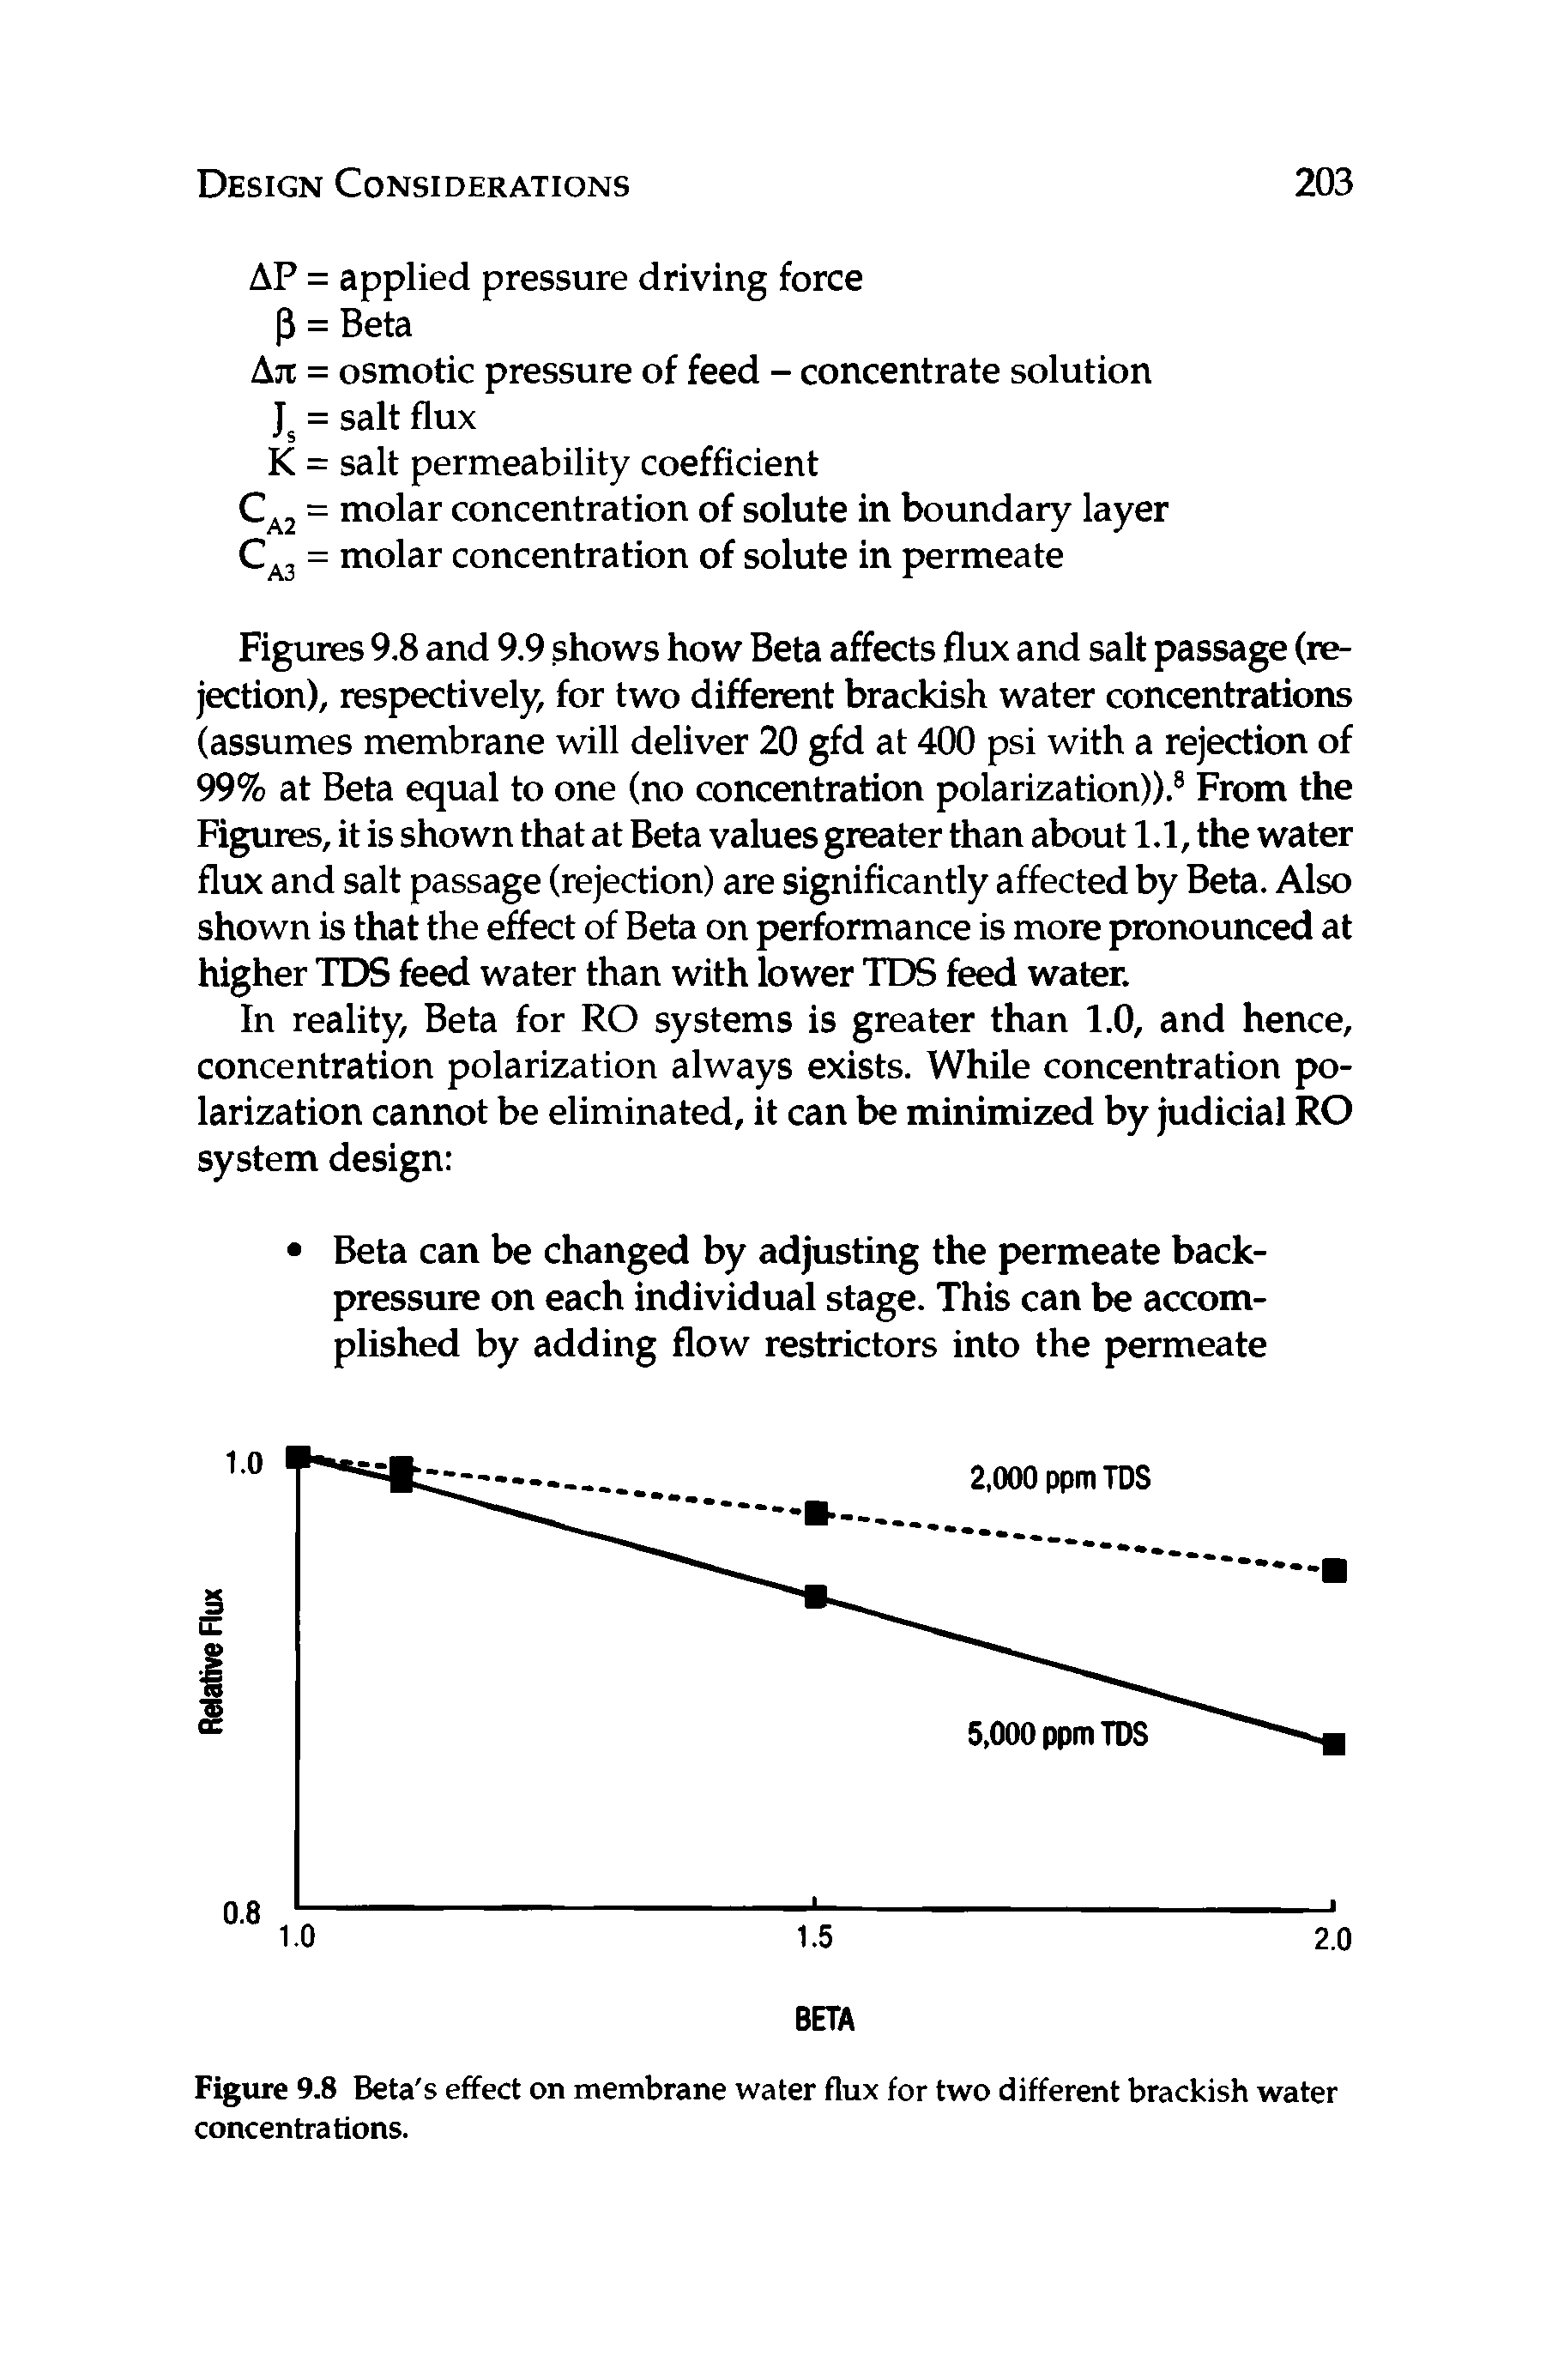 Figures 9.8 and 9.9 shows how Beta affects flux and salt passage (rejection), respectively, for two different brackish water concentrations (assumes membrane will deliver 20 gfd at 400 psi with a rejection of 99% at Beta equal to one (no concentration polarization)).8 From the Figures, it is shown that at Beta values greater than about 1.1, the water flux and salt passage (rejection) are significantly affected by Beta. Also shown is that the effect of Beta on performance is more pronounced at higher TDS feed water than with lower TDS feed water.